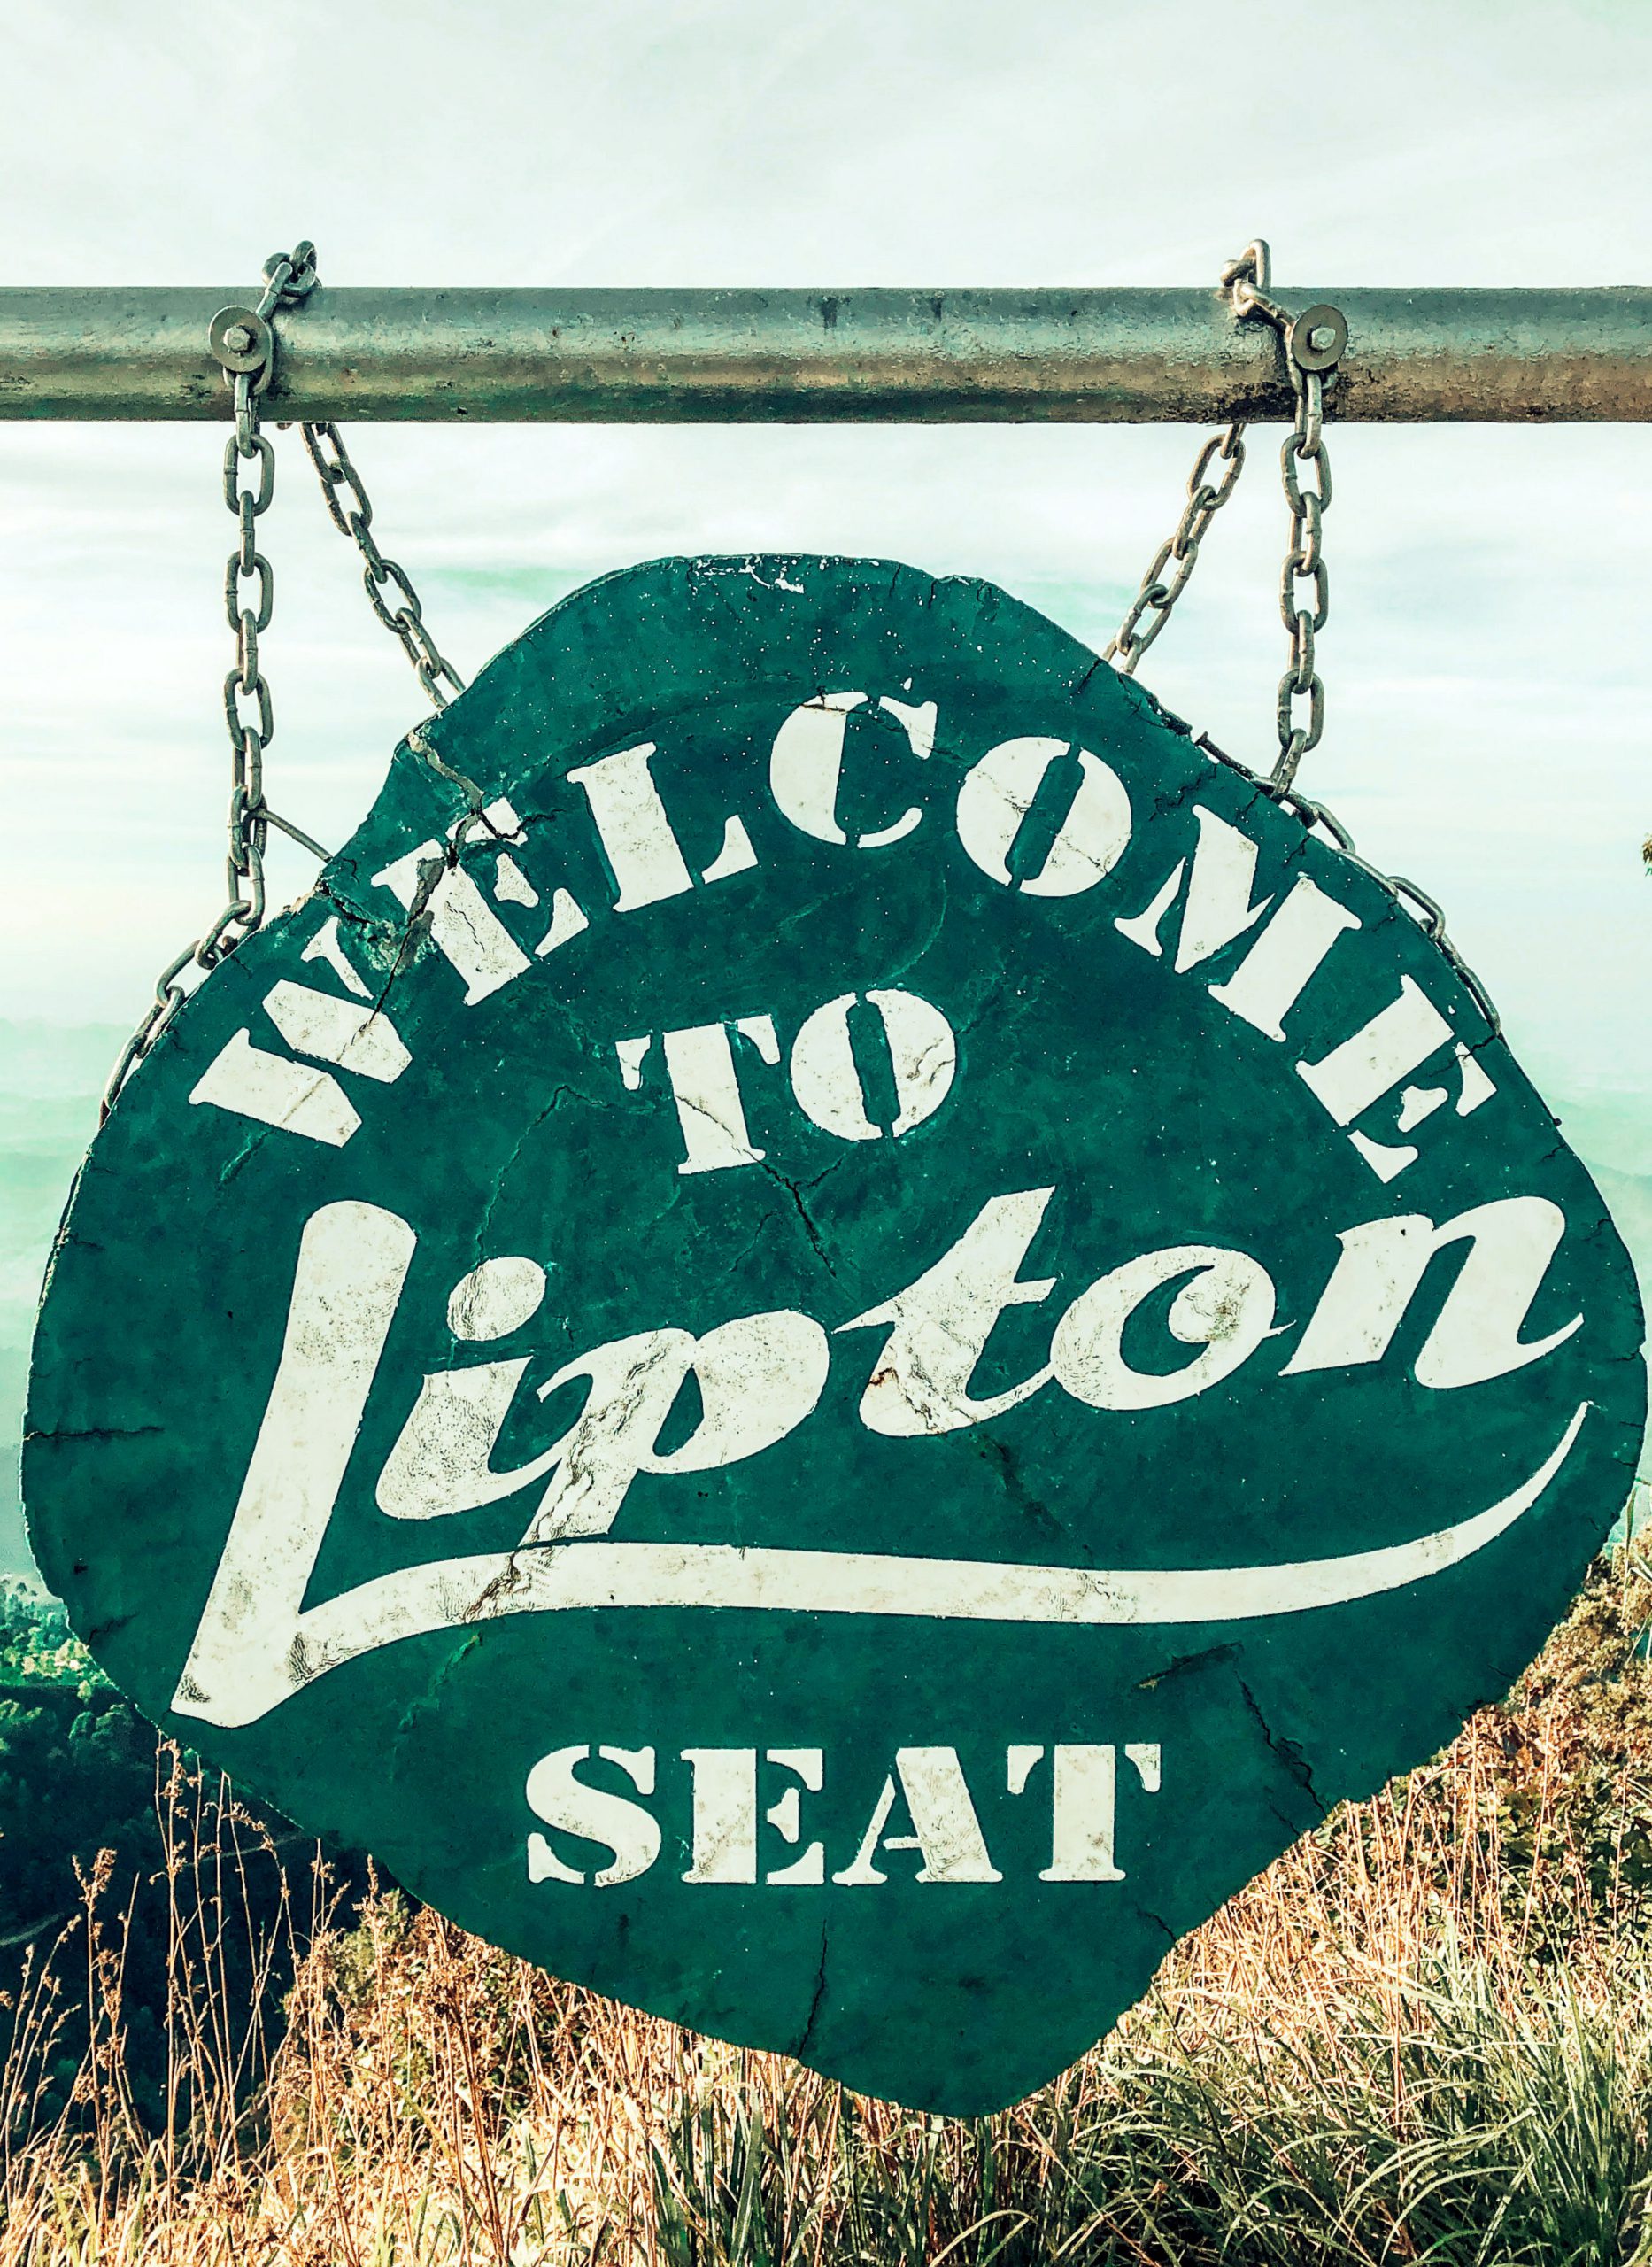 sign board - welcome to lipton seat